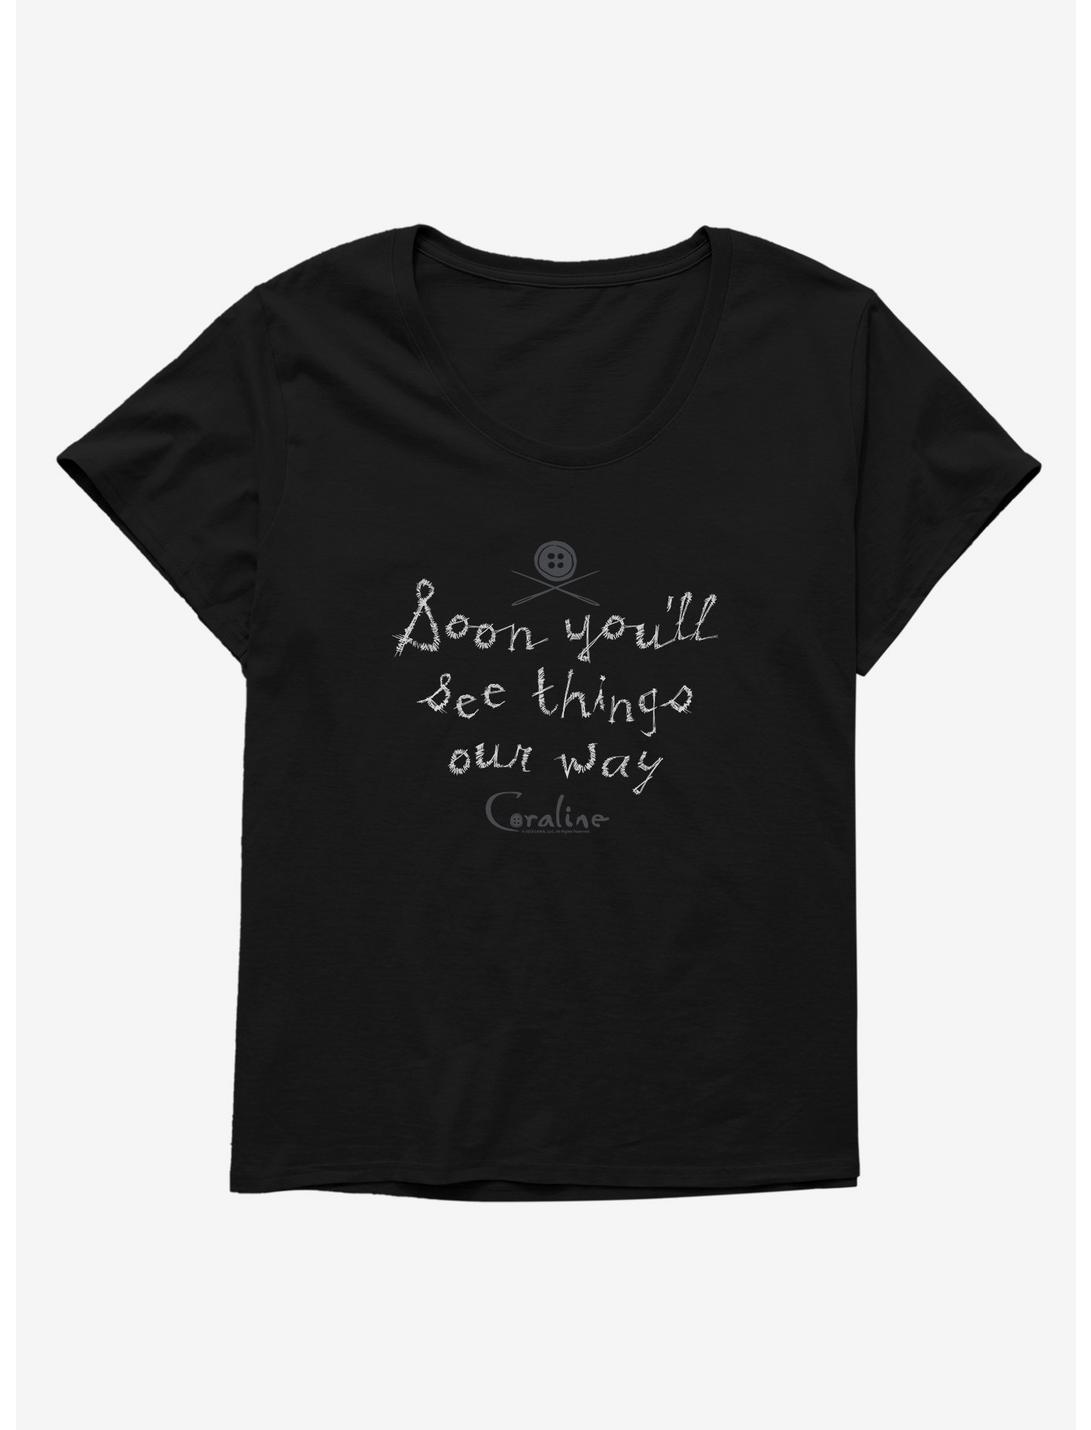 Coraline Soon You'll See Things Our Way Womens T-Shirt Plus Size, BLACK, hi-res